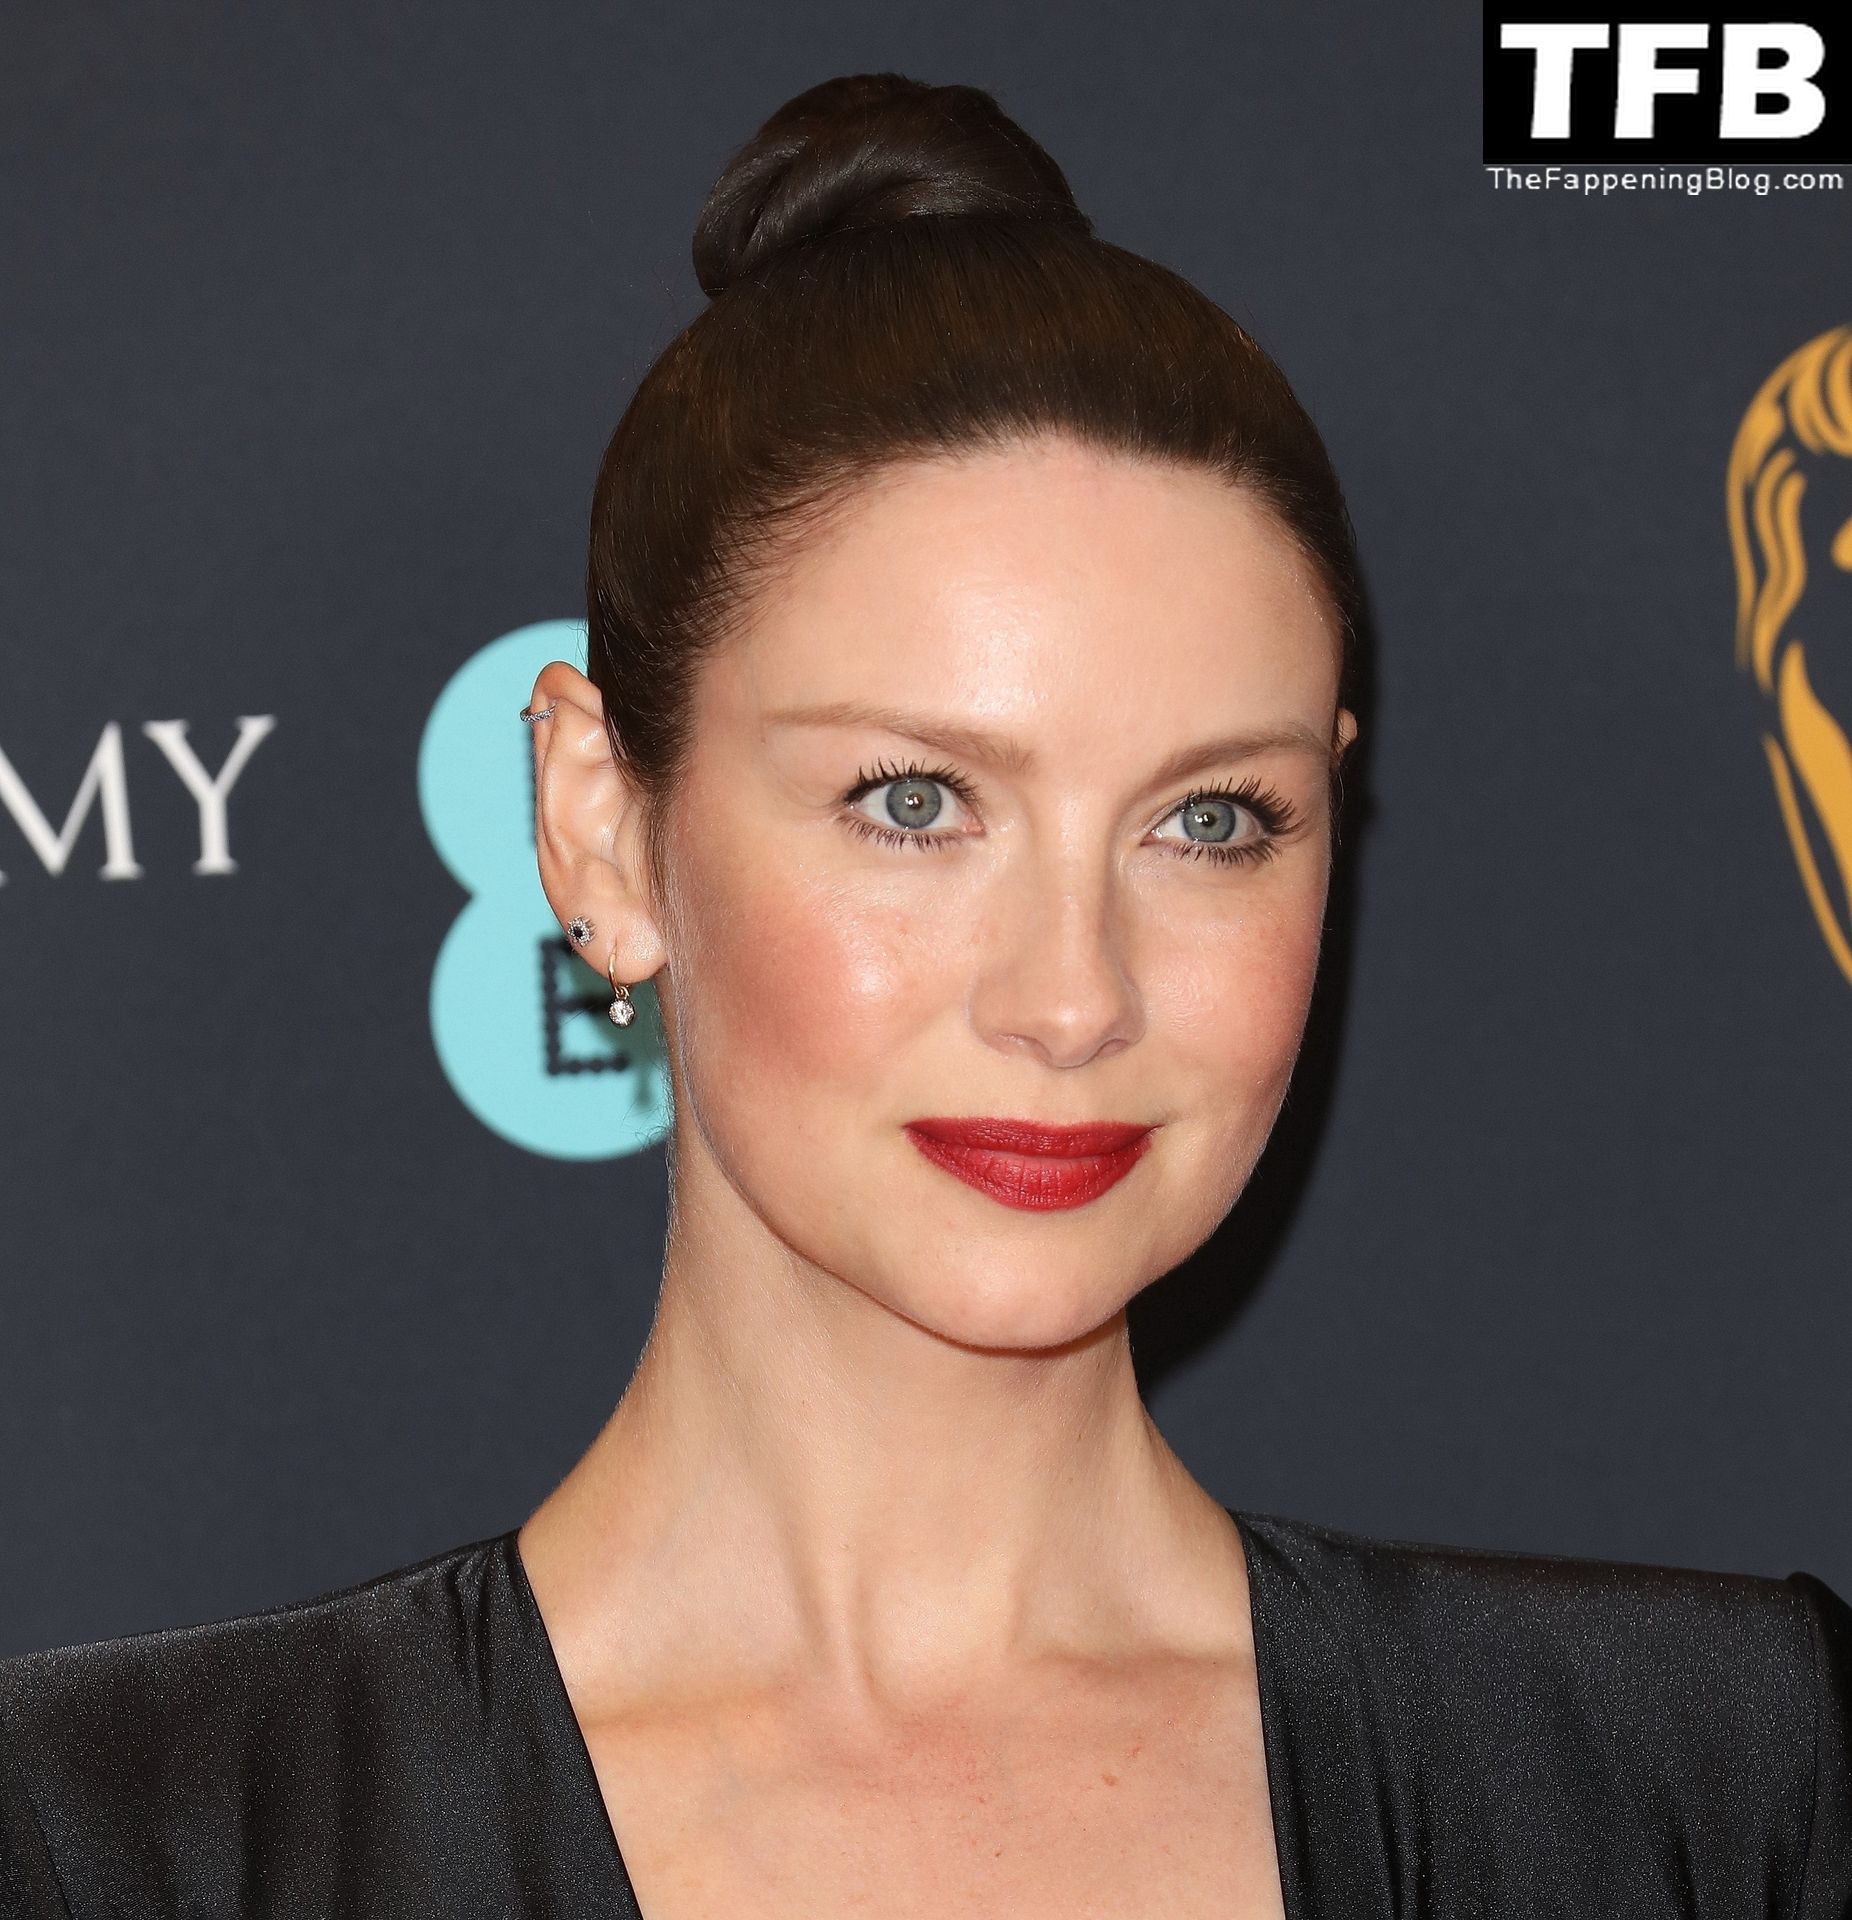 Caitriona-Balfe-Sexy-The-Fappening-Blog-36.jpg